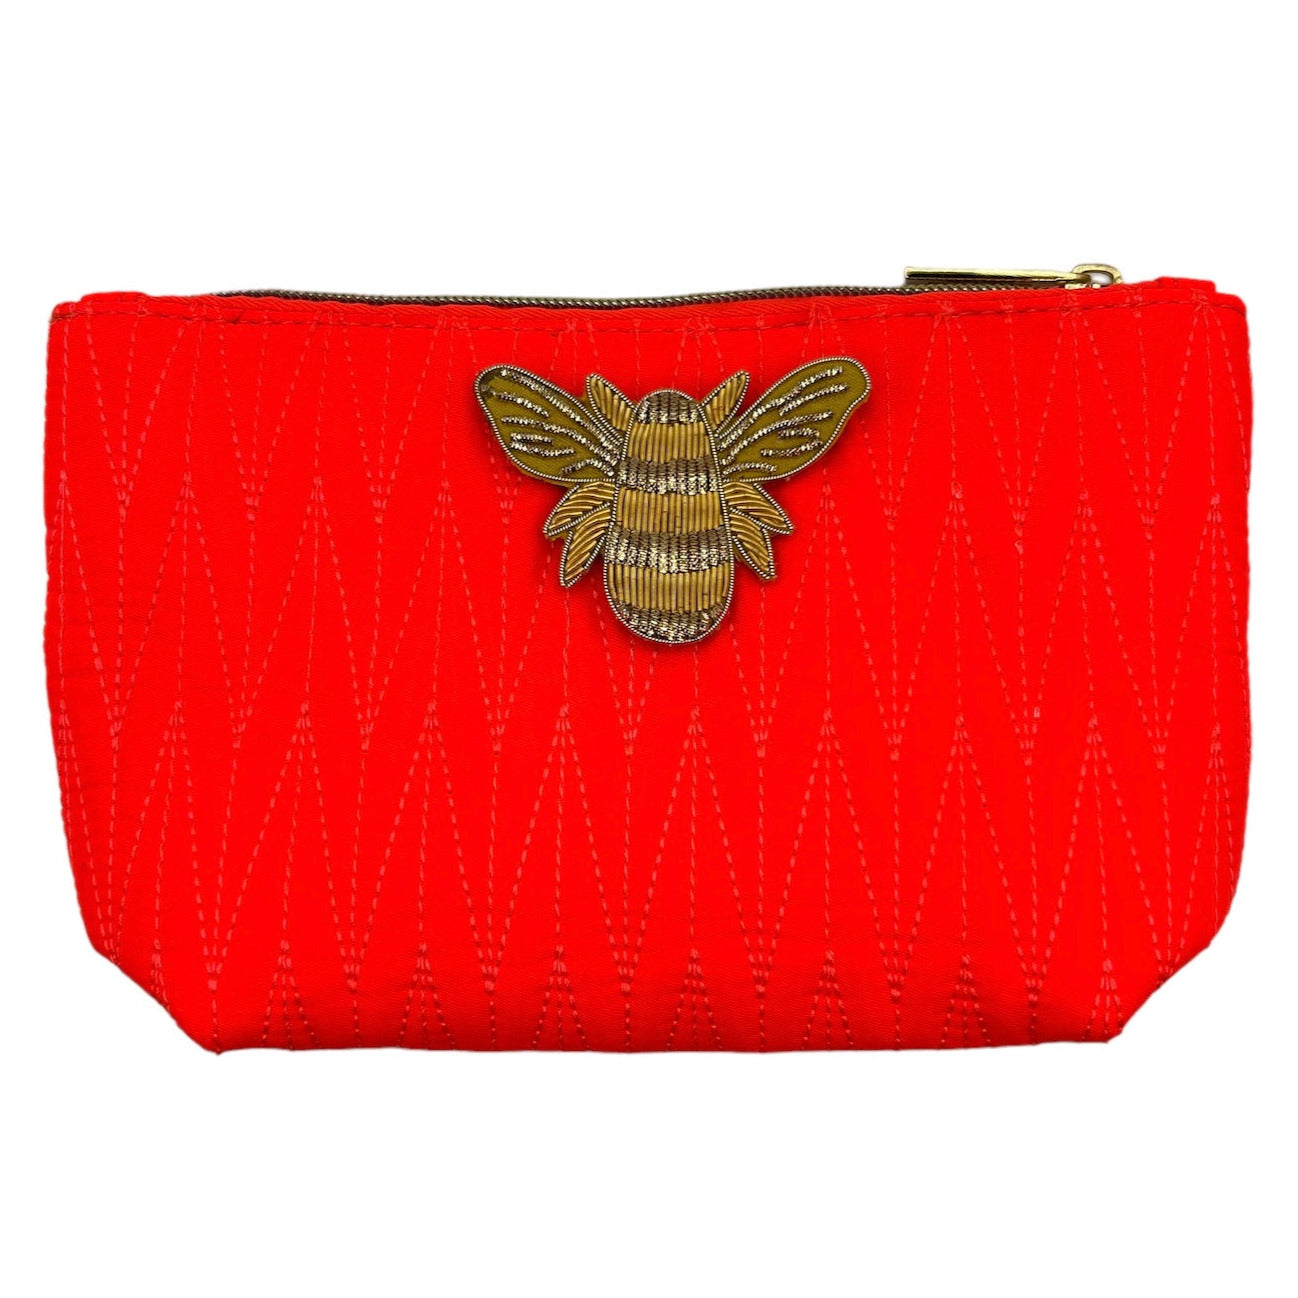 Orange Tribeca make up bag with a gold bee pin